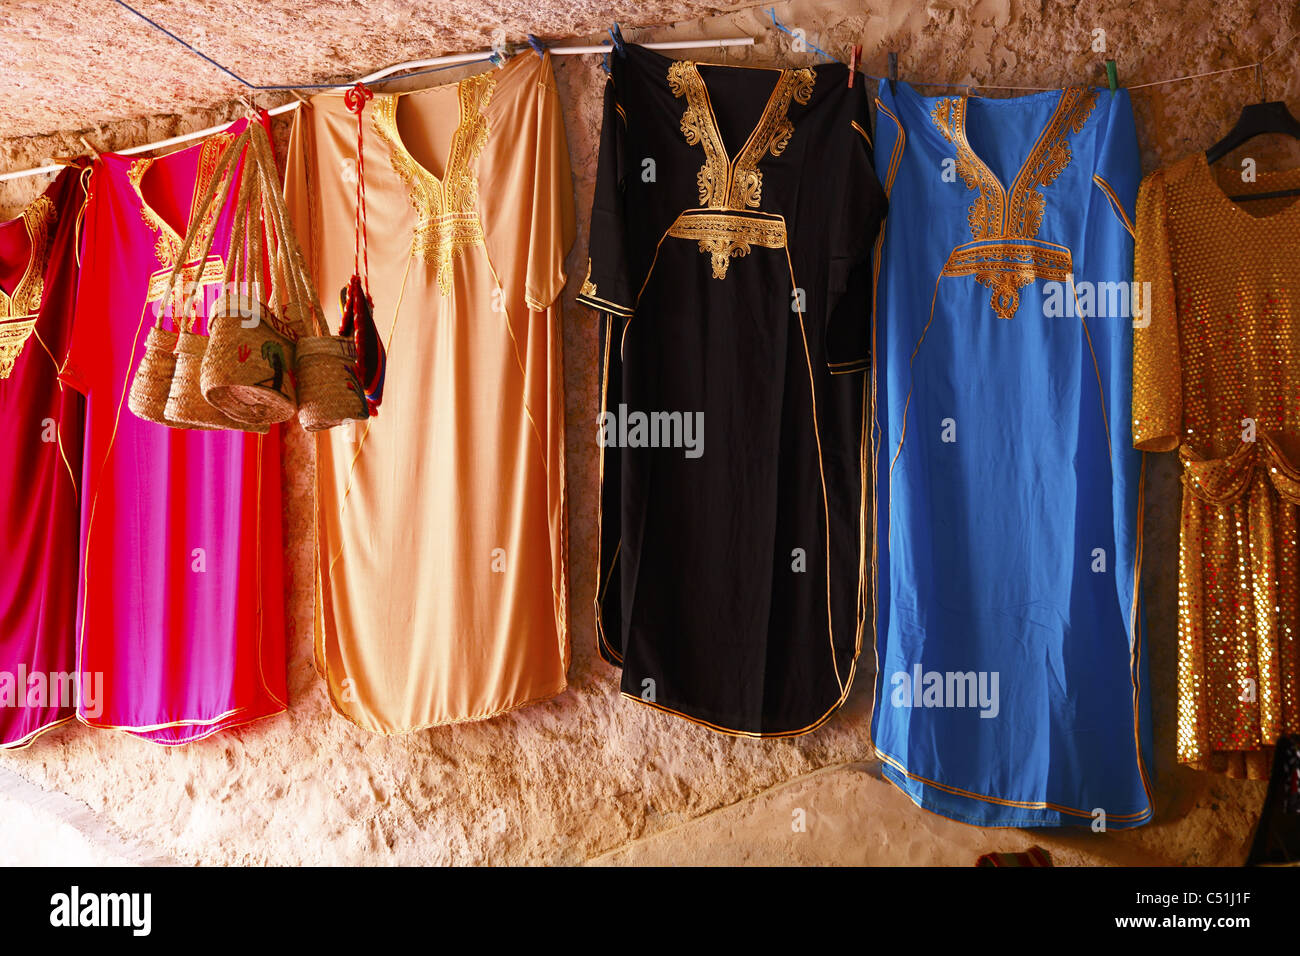 Africa, Tunisia, Tamerza Oasis, Stall Displaying Local Cloths and Dresses Stock Photo